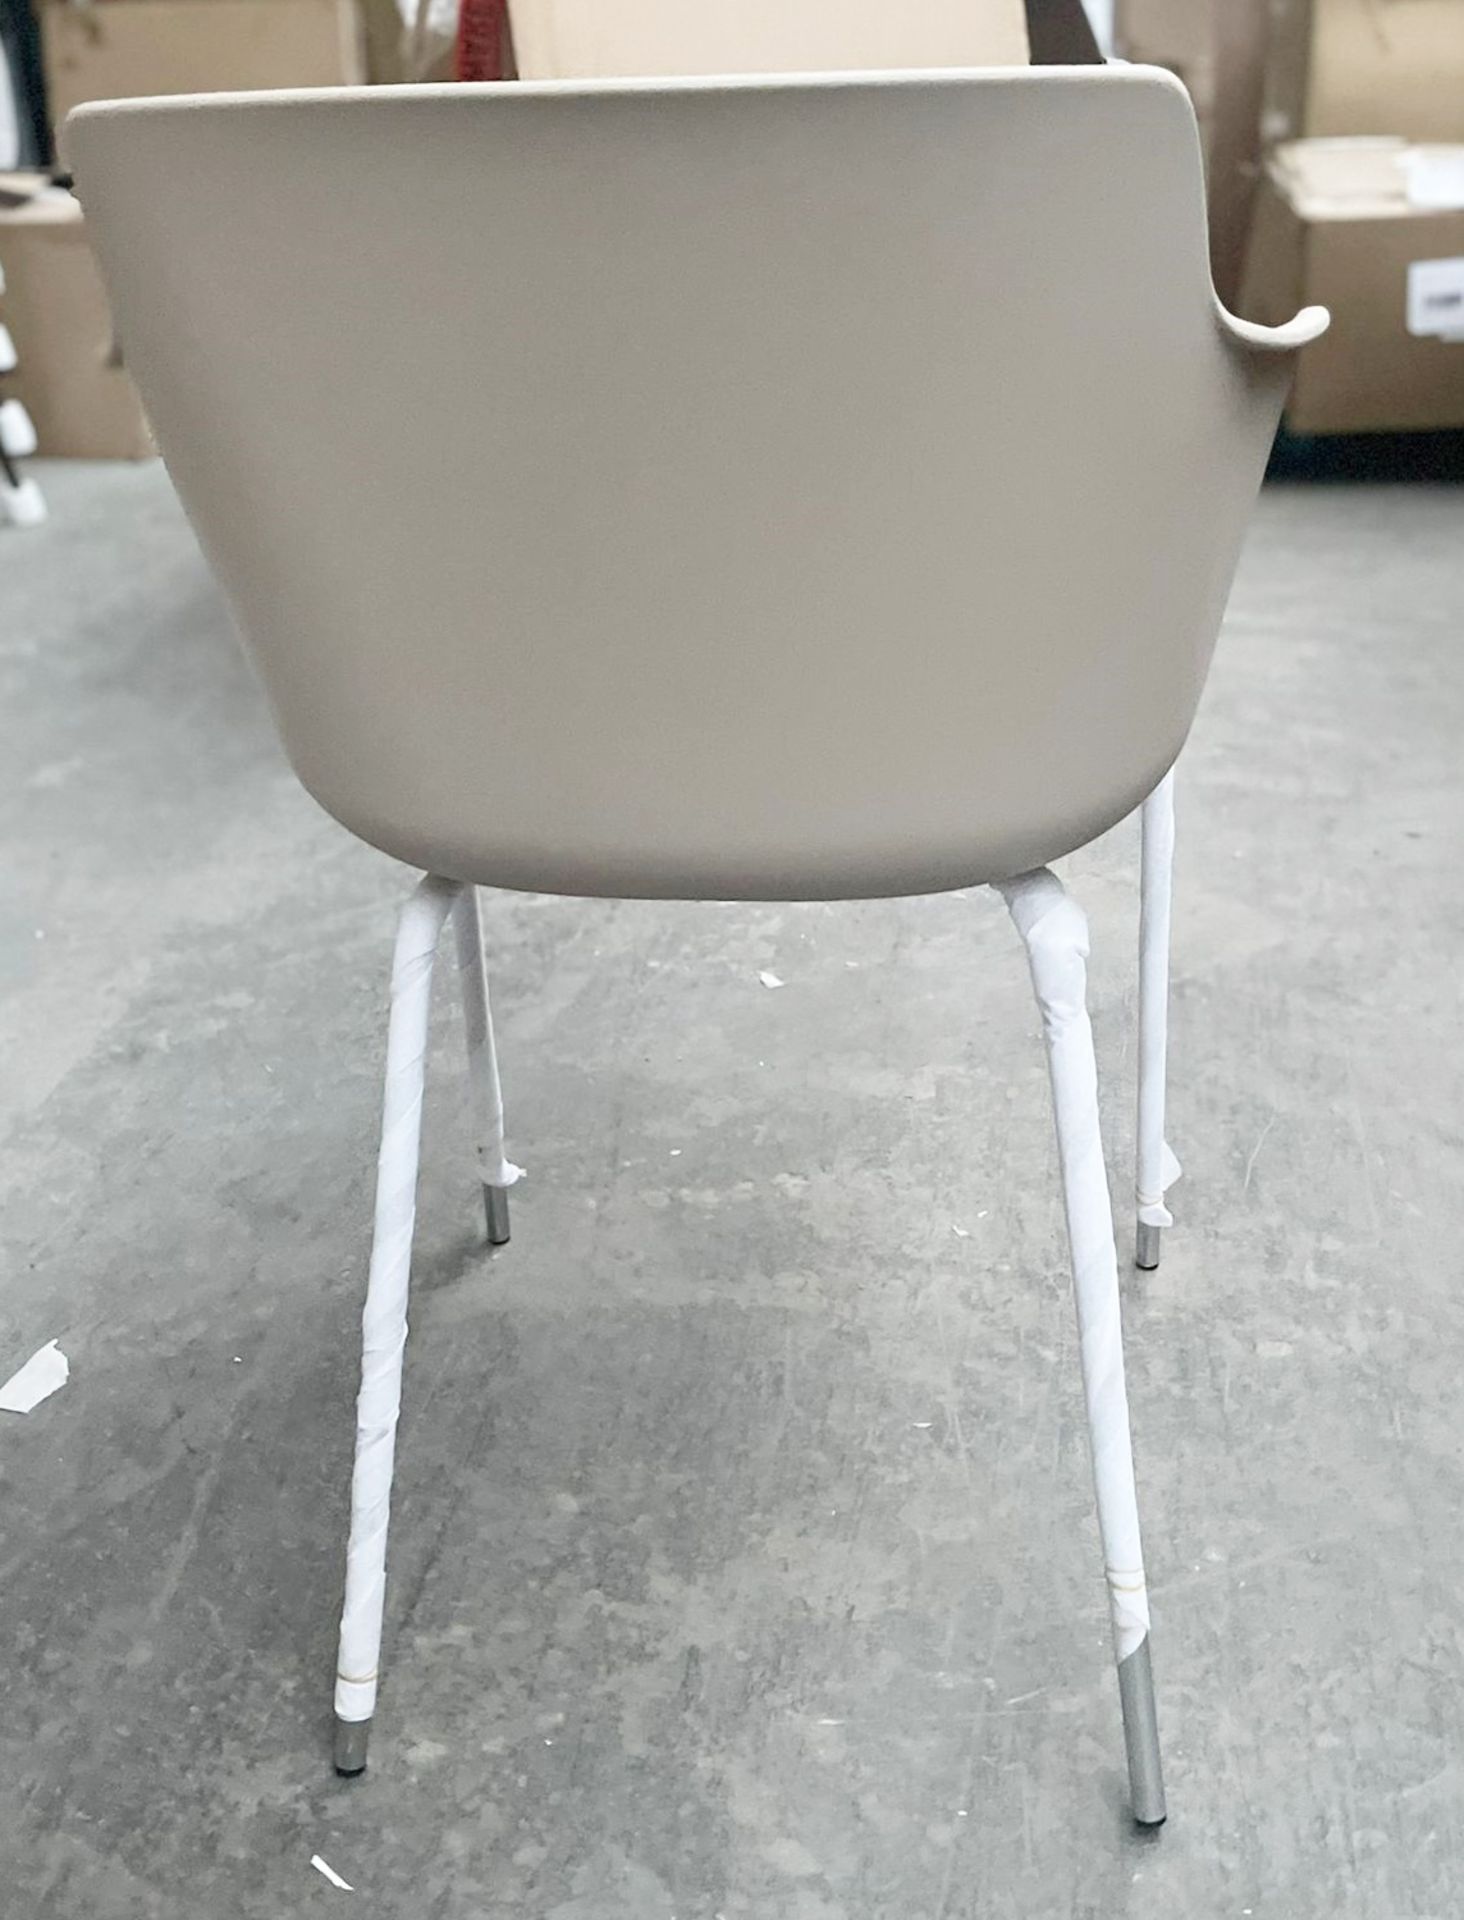 1 x Lullaby Ooland Light Brown Chair With Chrome Base - Dimensions: 57(h) x 52(w) x 52(d) cm - Brand - Image 3 of 5